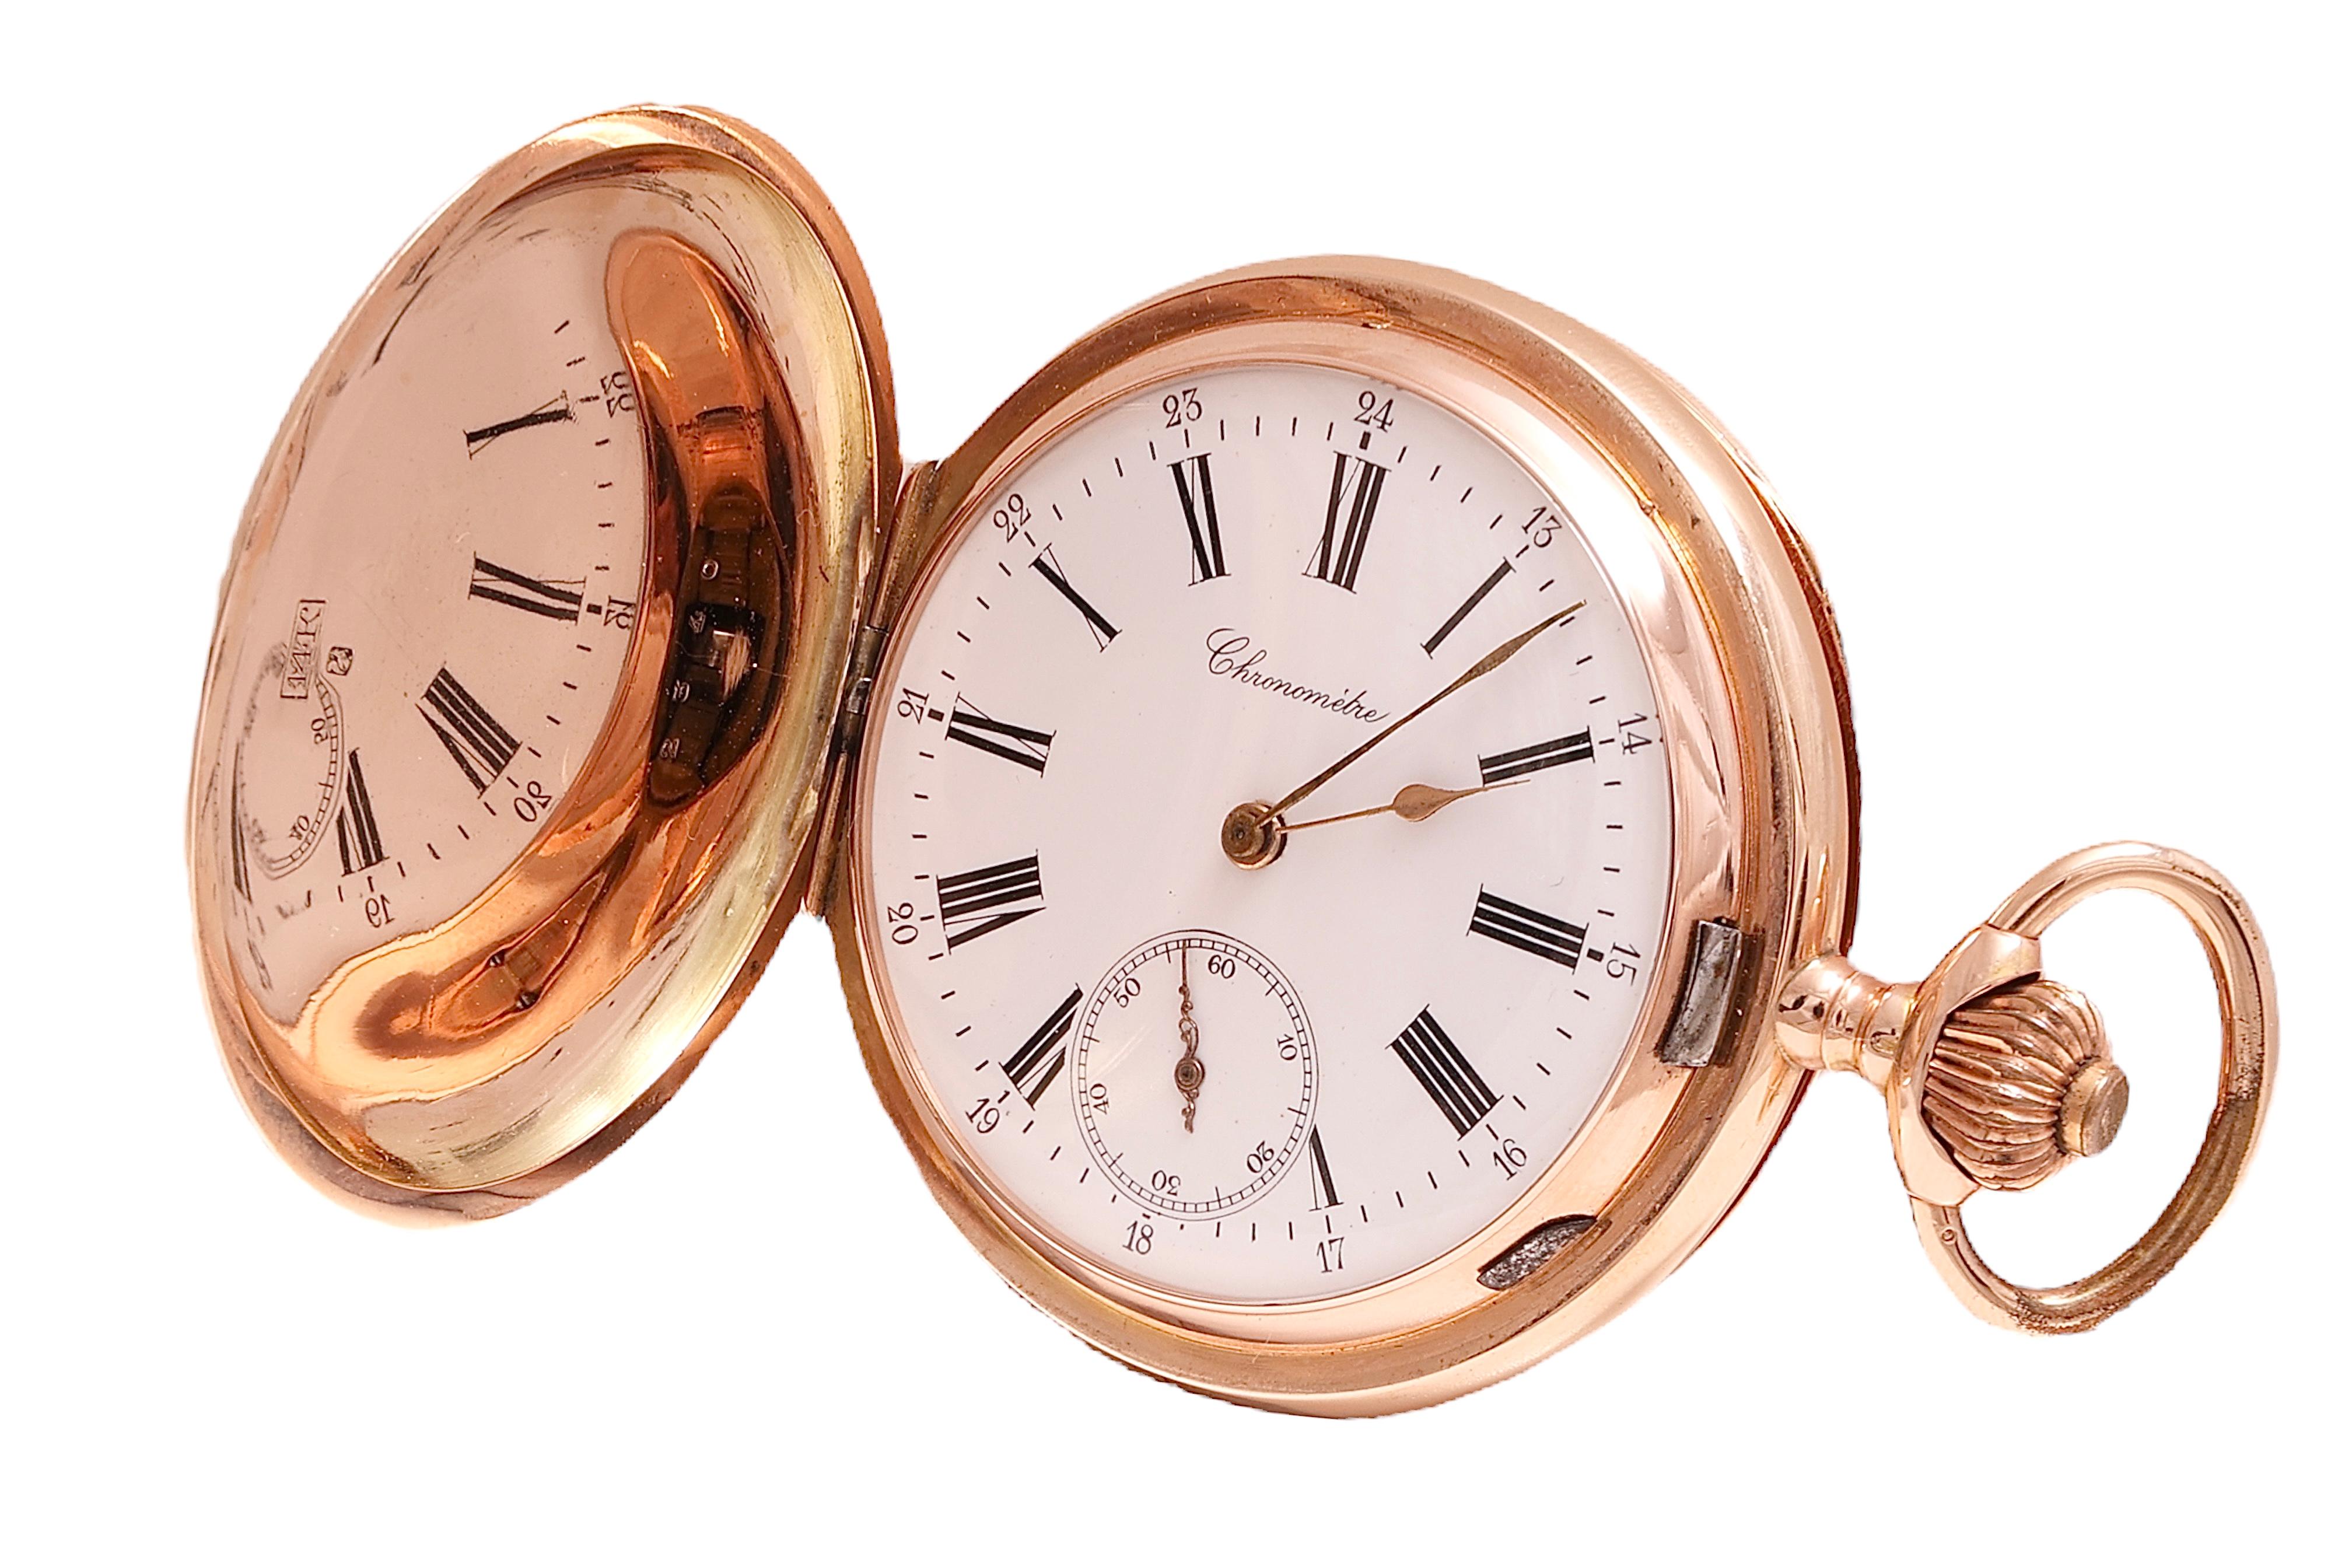 Collectors Extremely Rare 14 kt. Pink Gold Chronomètre Pocket Watch with Subsidiary Seconds & Tonneau Form Balance Spring like Deck Chronometer 

Movement: DETENT CHRONOMETER w/ HELICAL HAIRSPRING, Hand-winding with Cilinder Form Balance like the